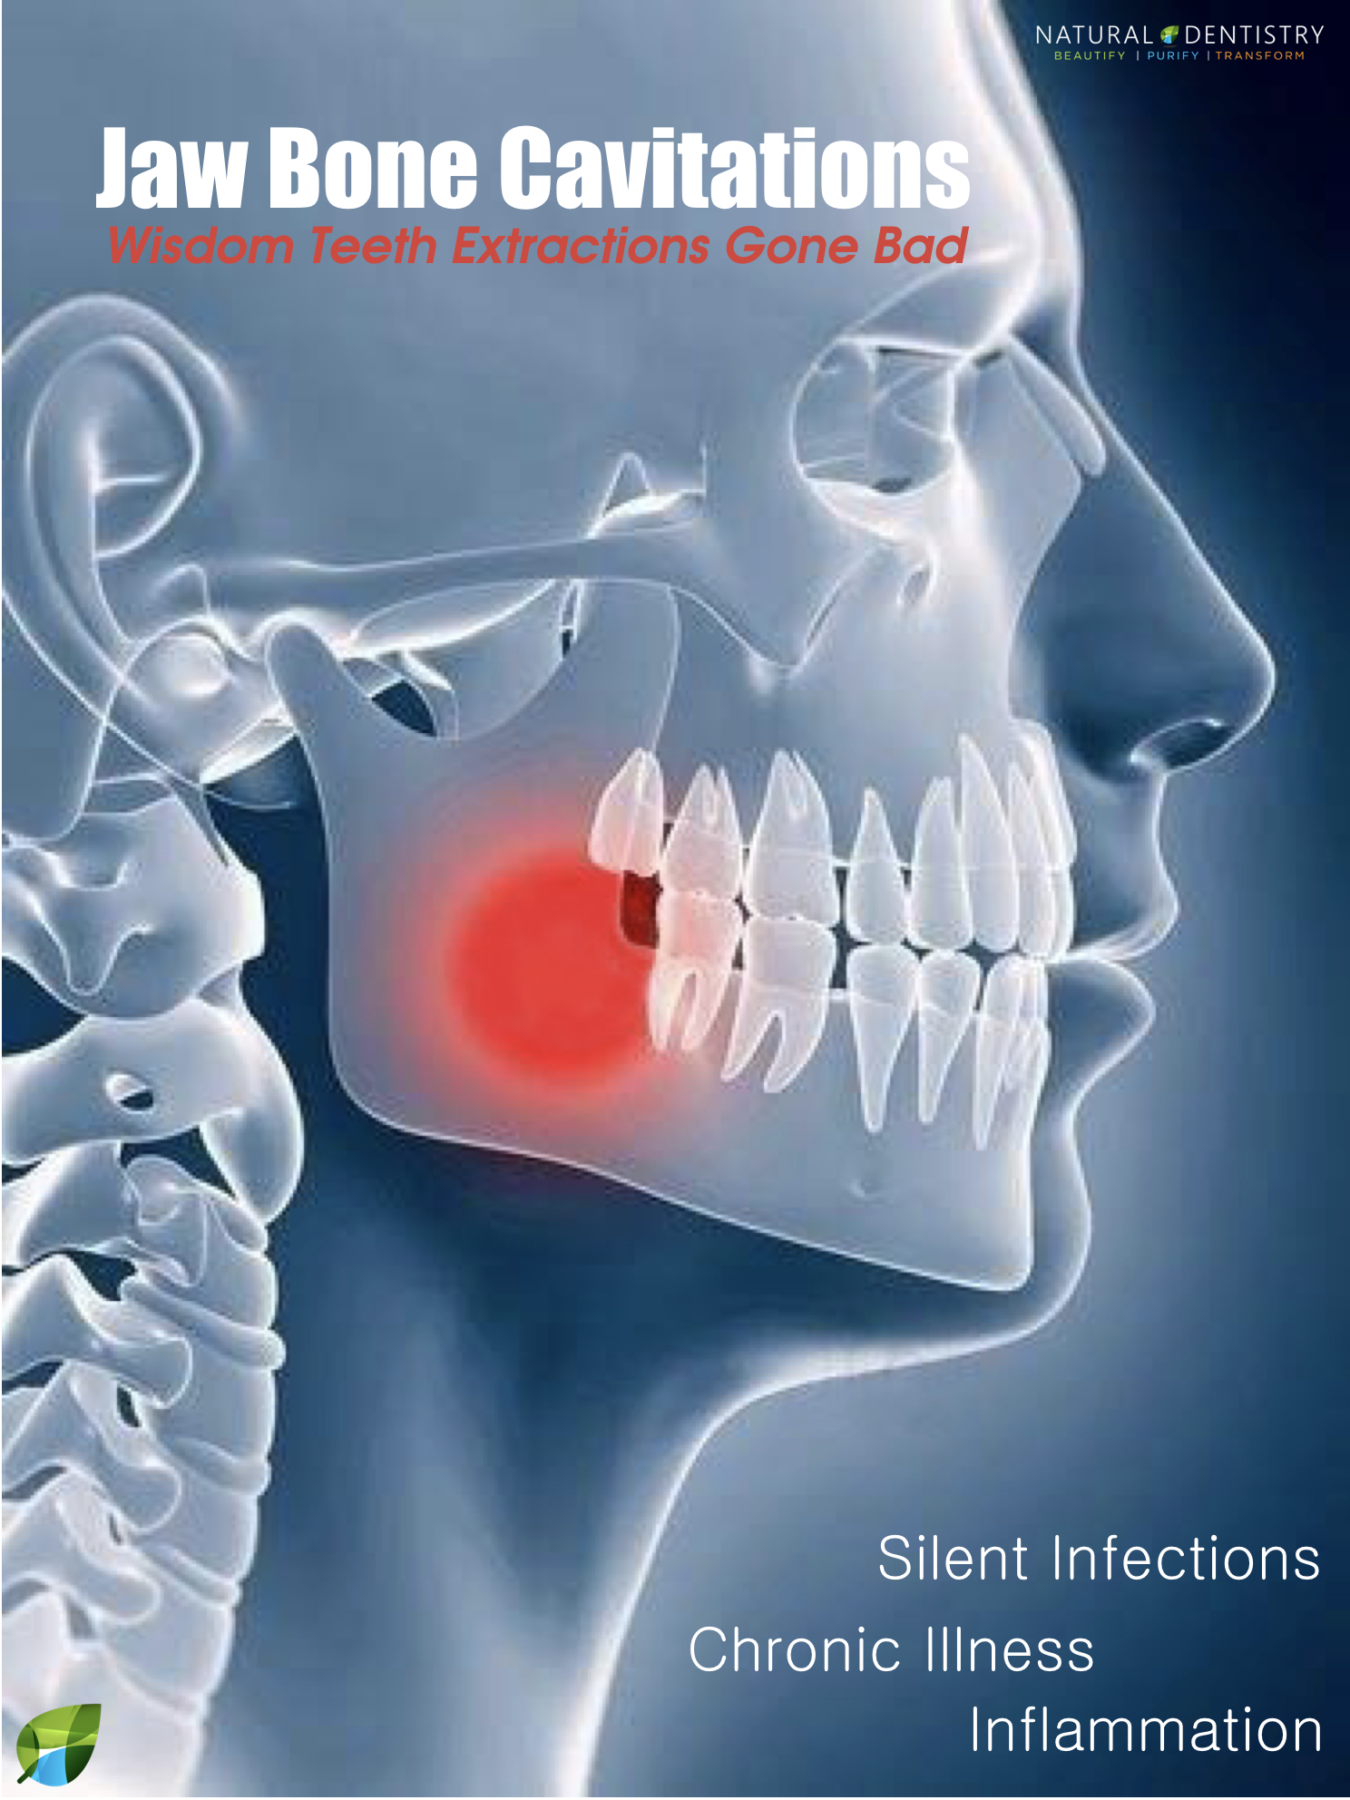 Signs Of Tooth Infection Spreading To Jaw Bone